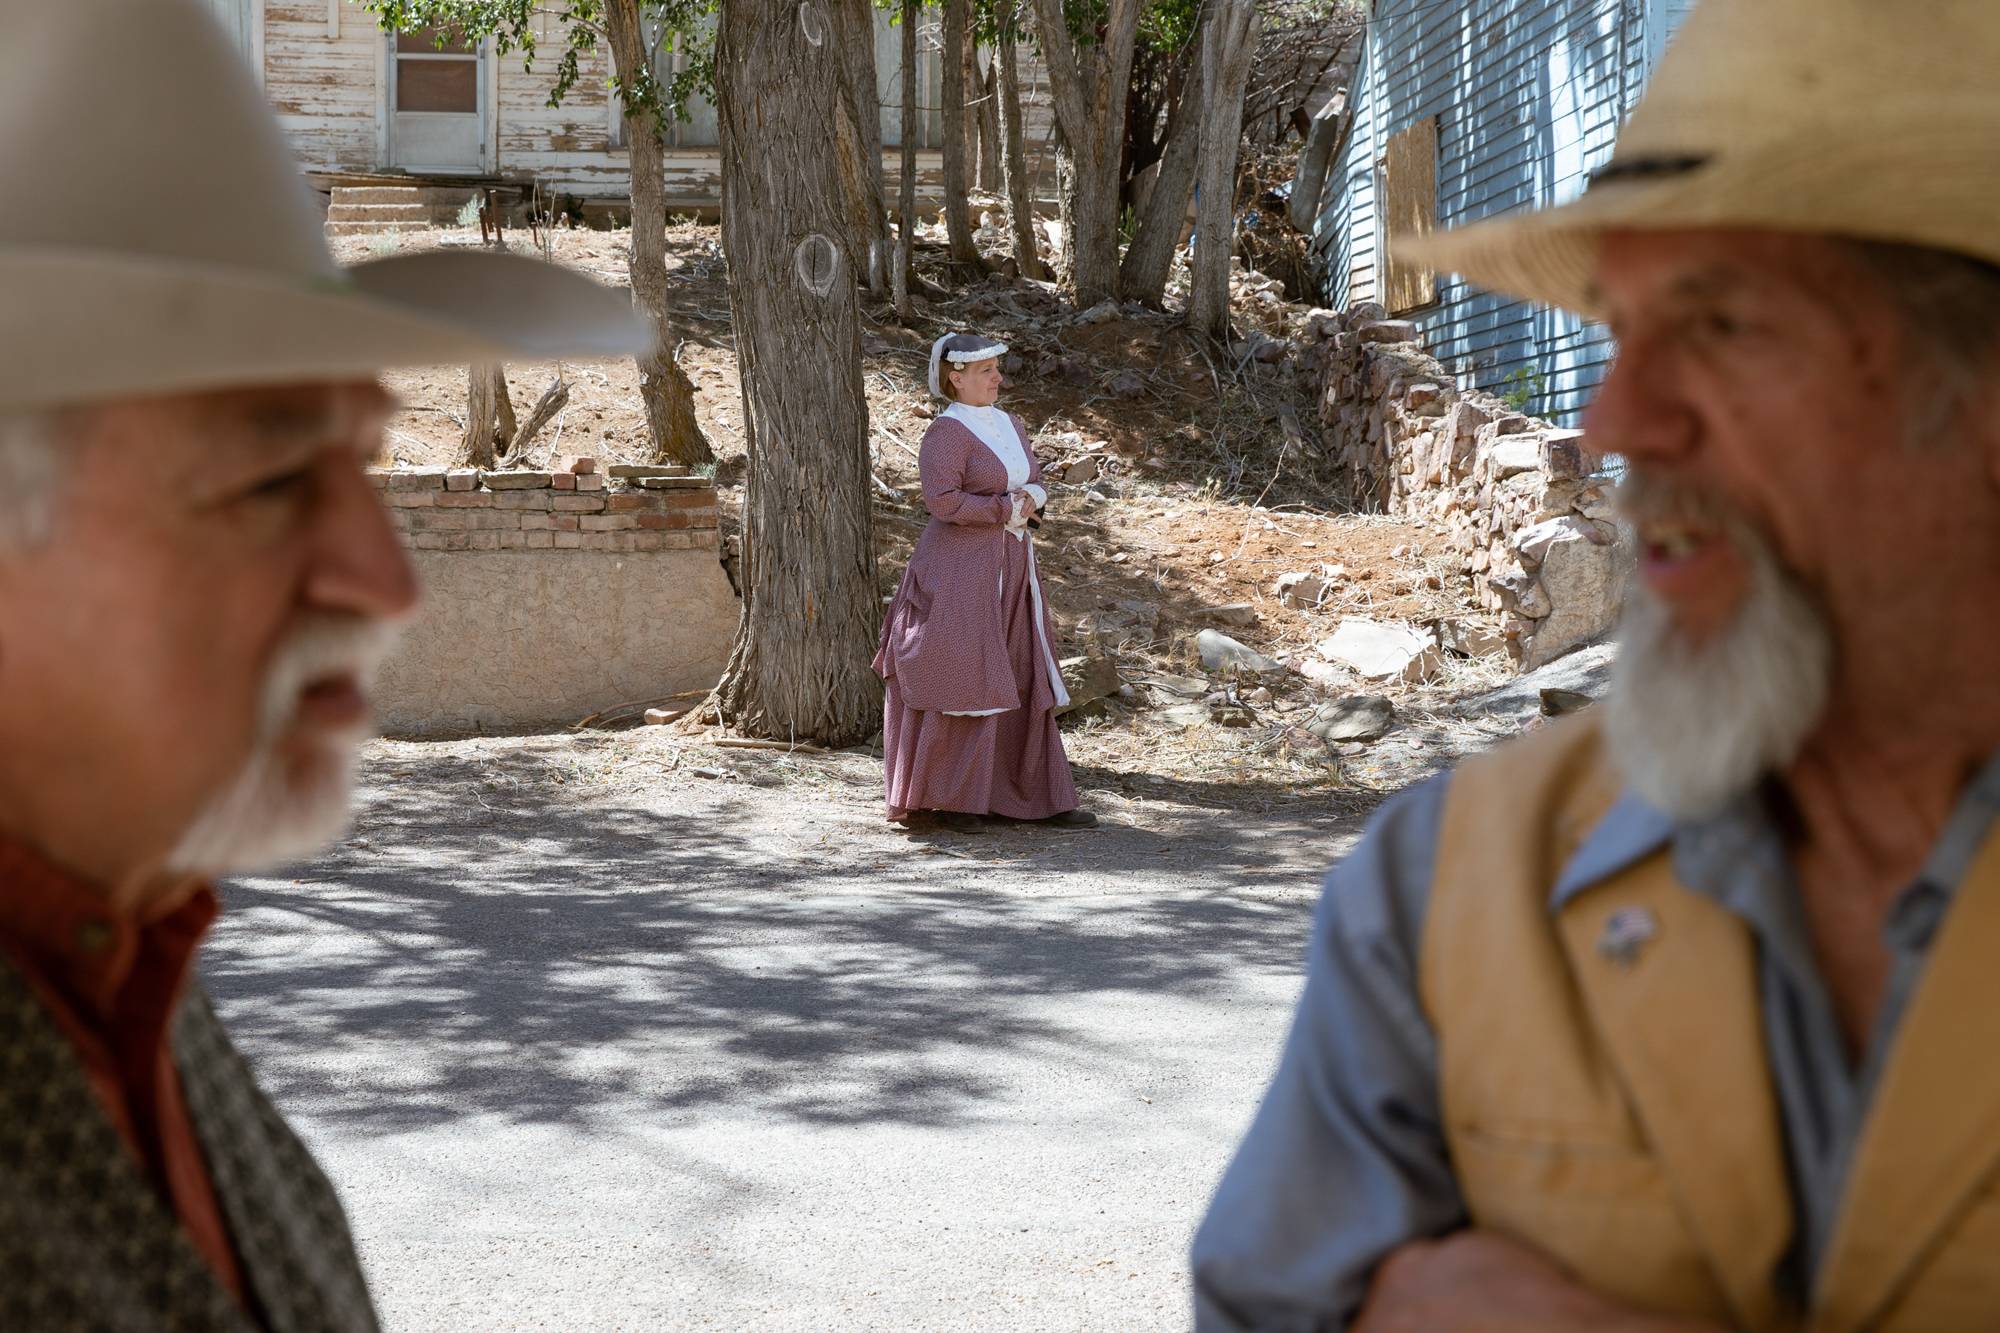 Sharron Faehling, background, Tim Umina, left, and Bill Merfy, right, wait outside of Christ Episcopal Church during the filming of an 1800s western documentary on Friday, June 24, 2022, in Pioche, Nevada.